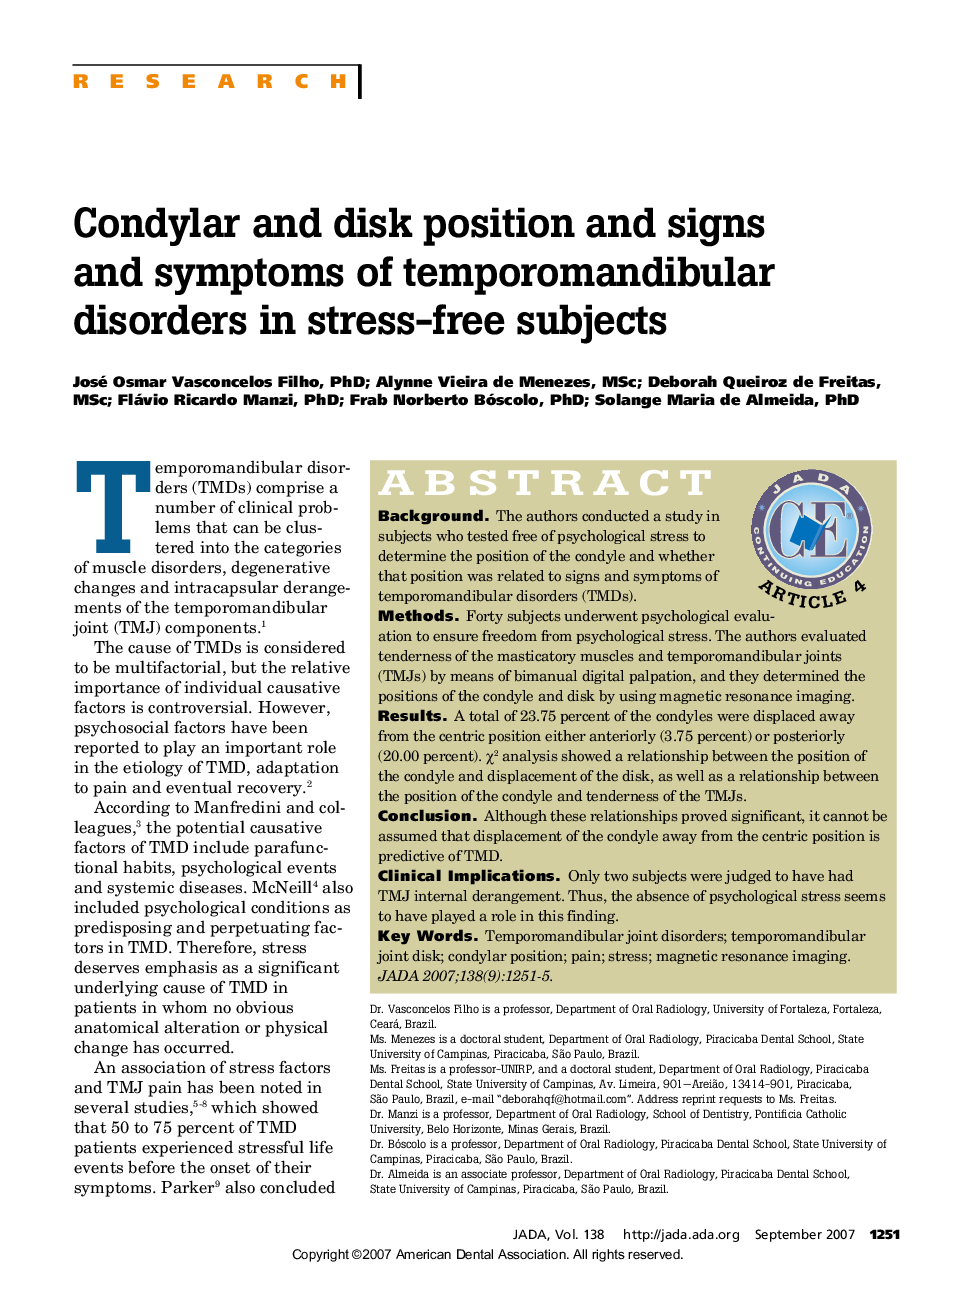 Condylar and Disk Position and Signs and Symptoms of Temporomandibular Disorders in Stress-Free Subjects